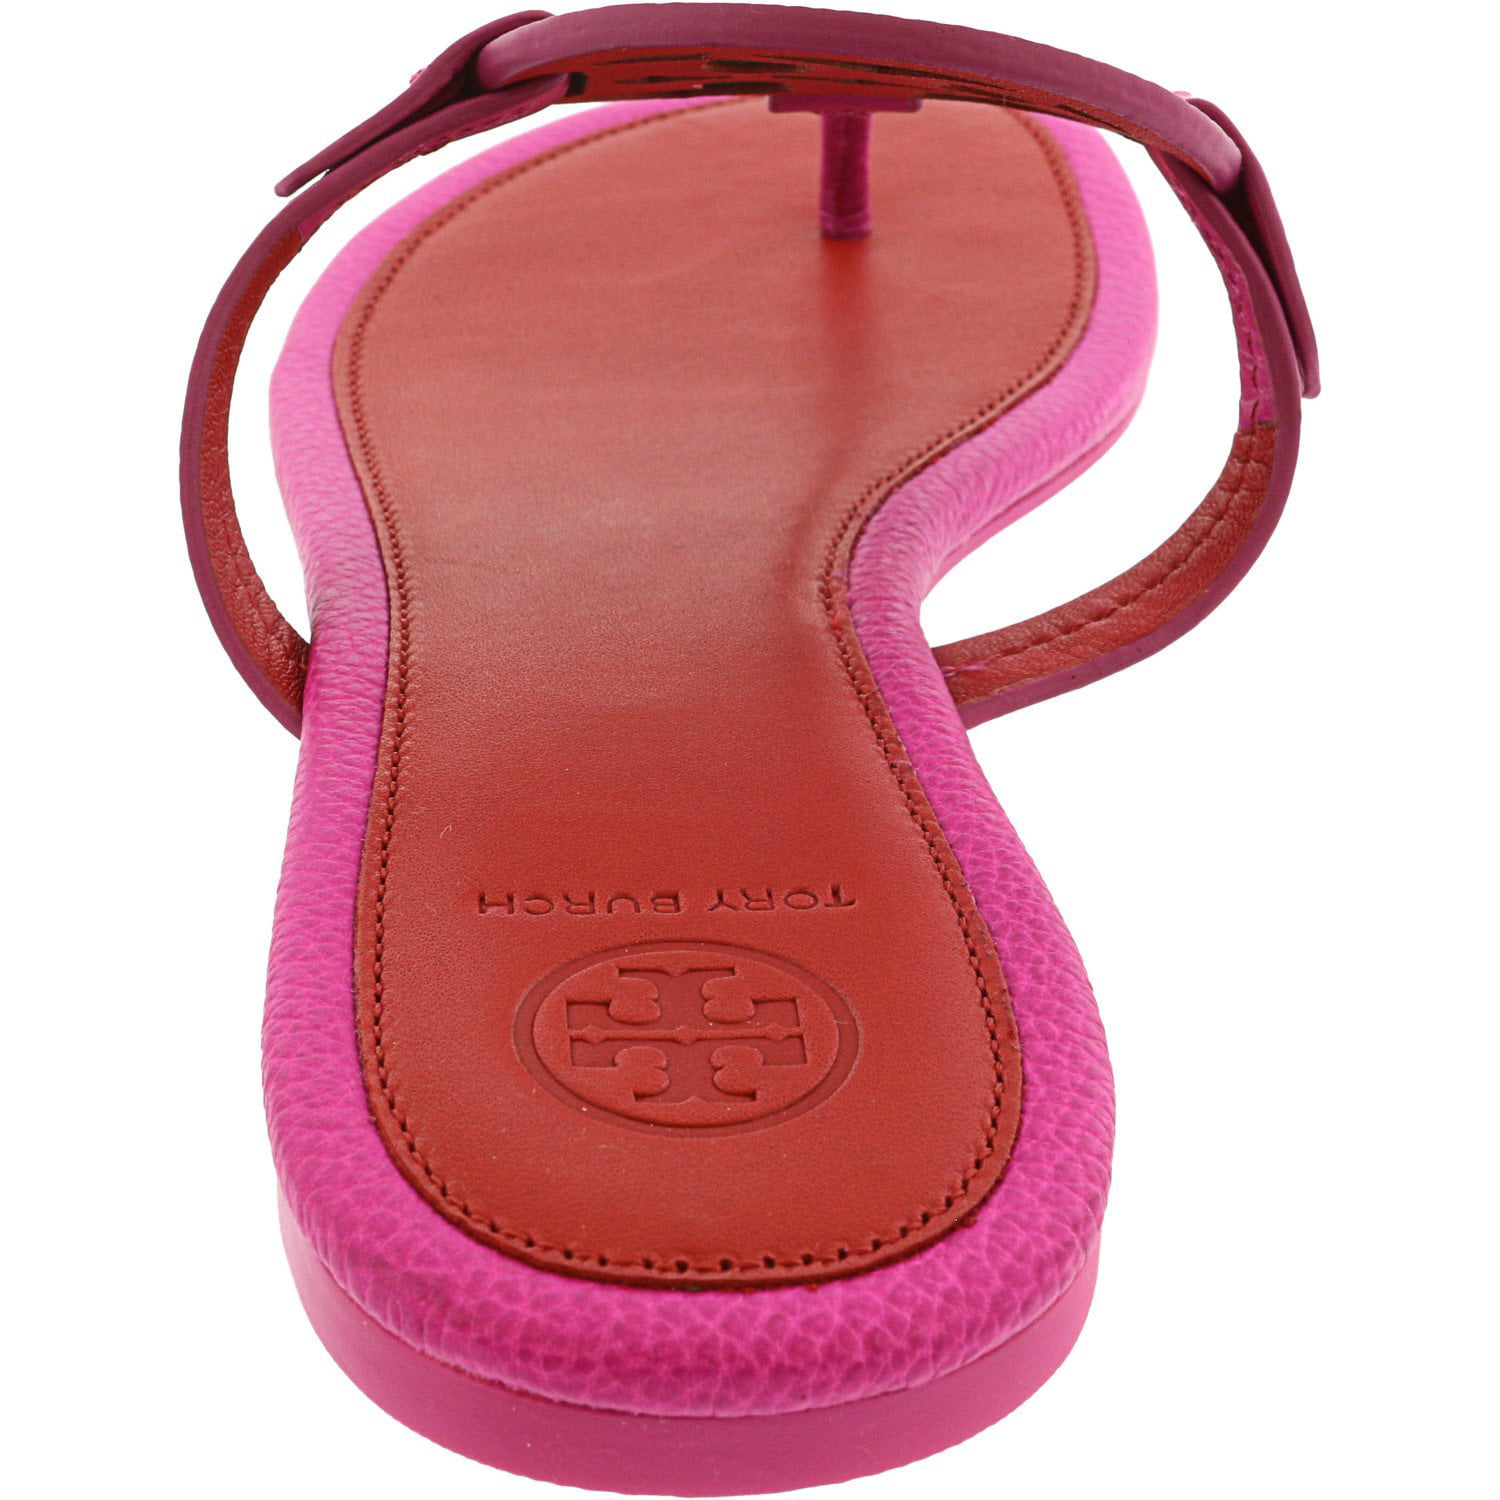 Tory Burch Women's Miller Tumbled Leather Imperial Pink / Brilliant Red  Ankle-High Sandal - 9M 